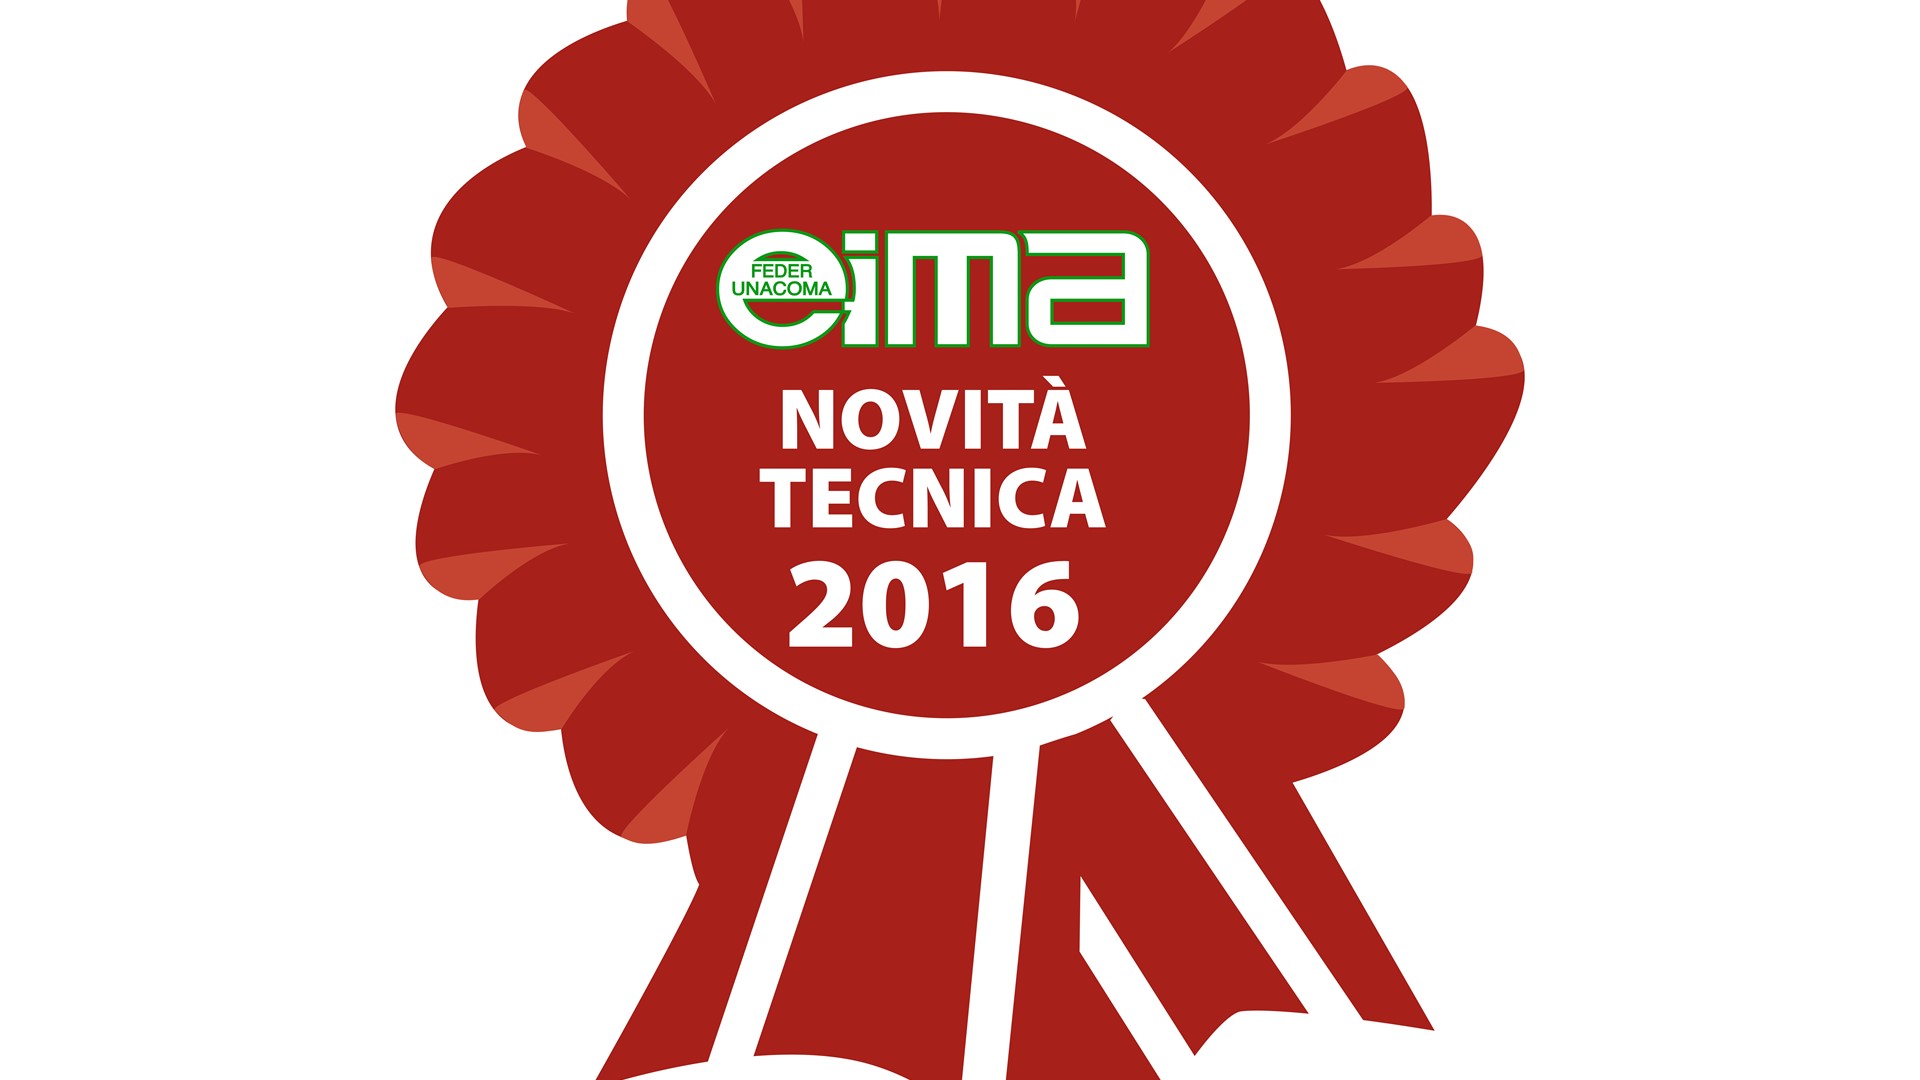 The Blue CabTM 4 was the recipient of the Technical Innovation Award at EIMA International 2016